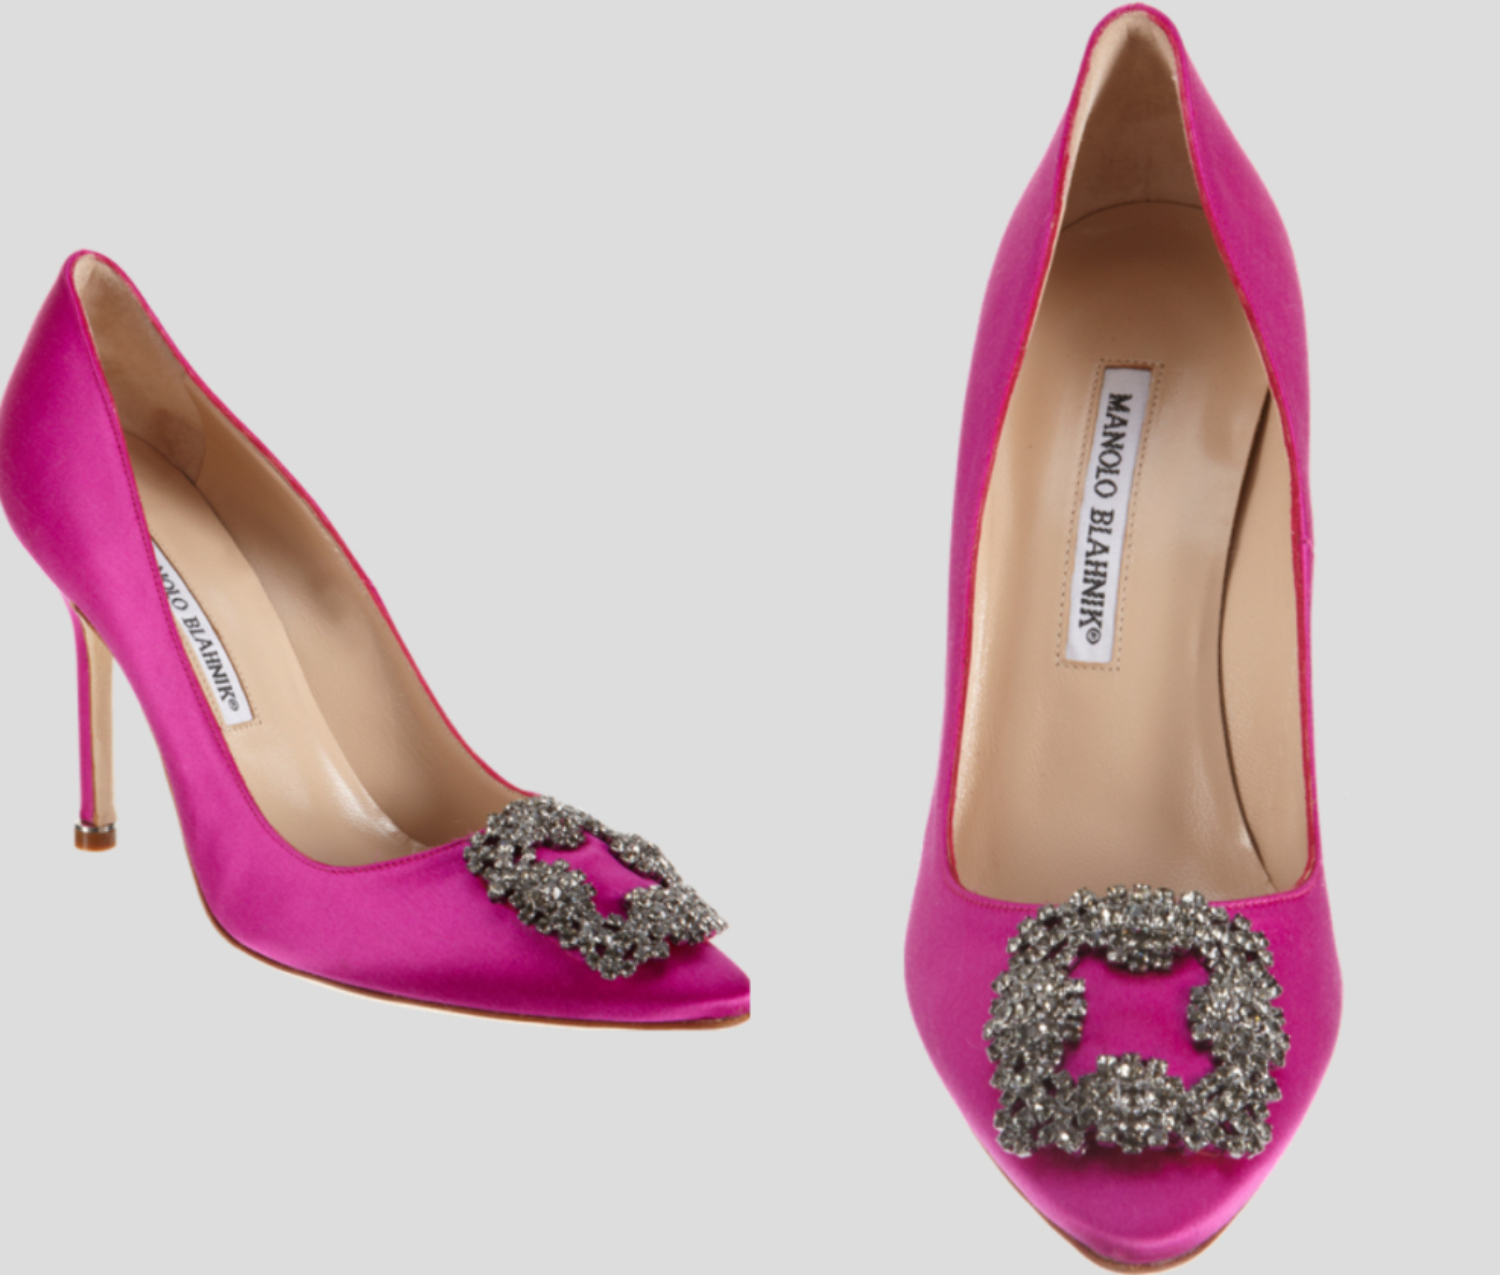 manolo blahnik site 1 : women clothing shop on Rediff Pages